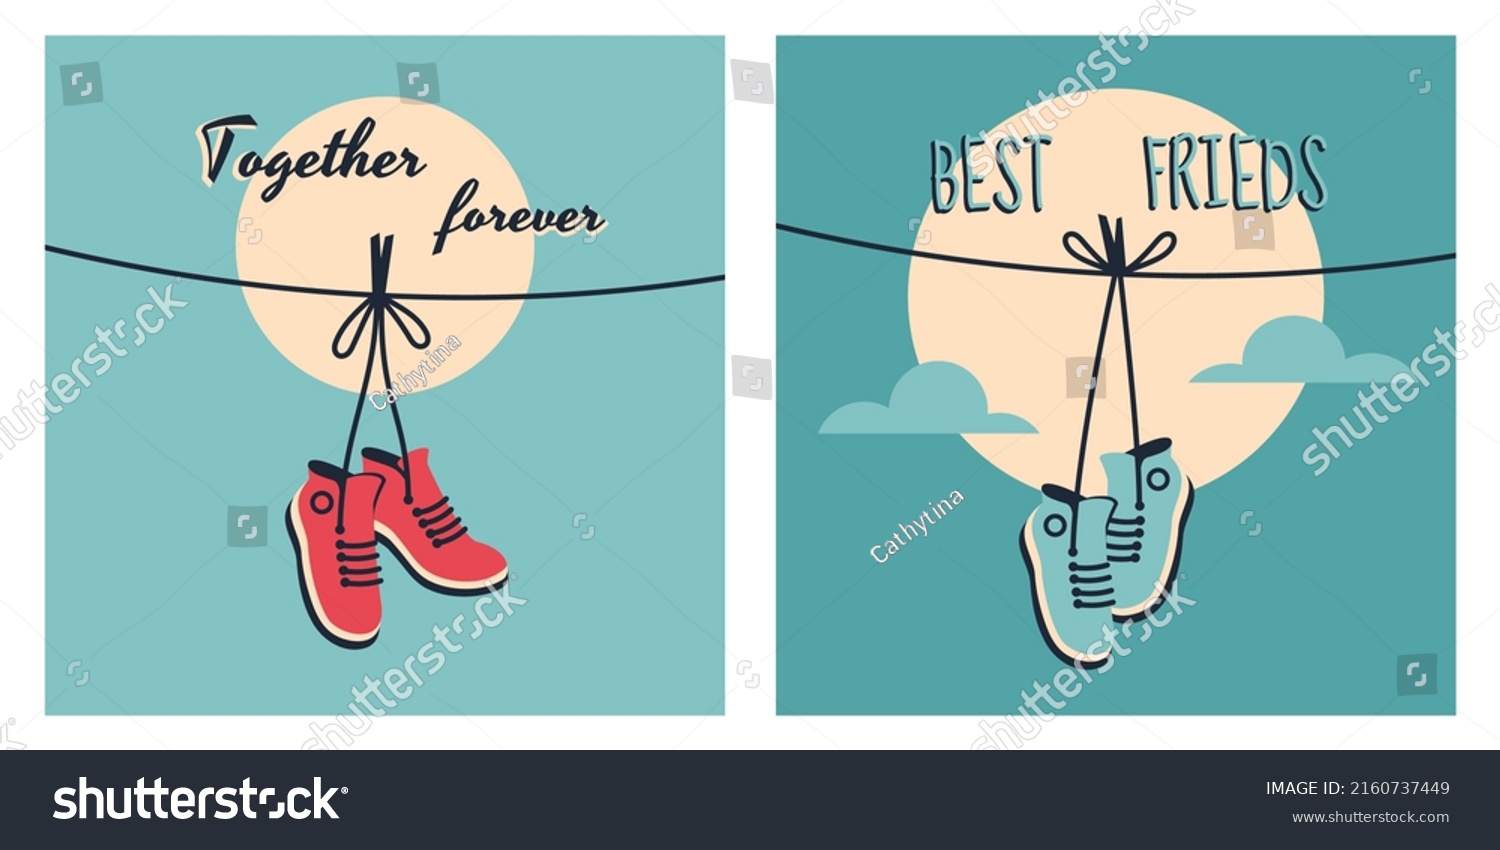 SVG of Sneakers hanging in retro style. Pair of shoes with tied laces dangling on a string. Vector flat illustration with lettering for banner, poster, cover art svg